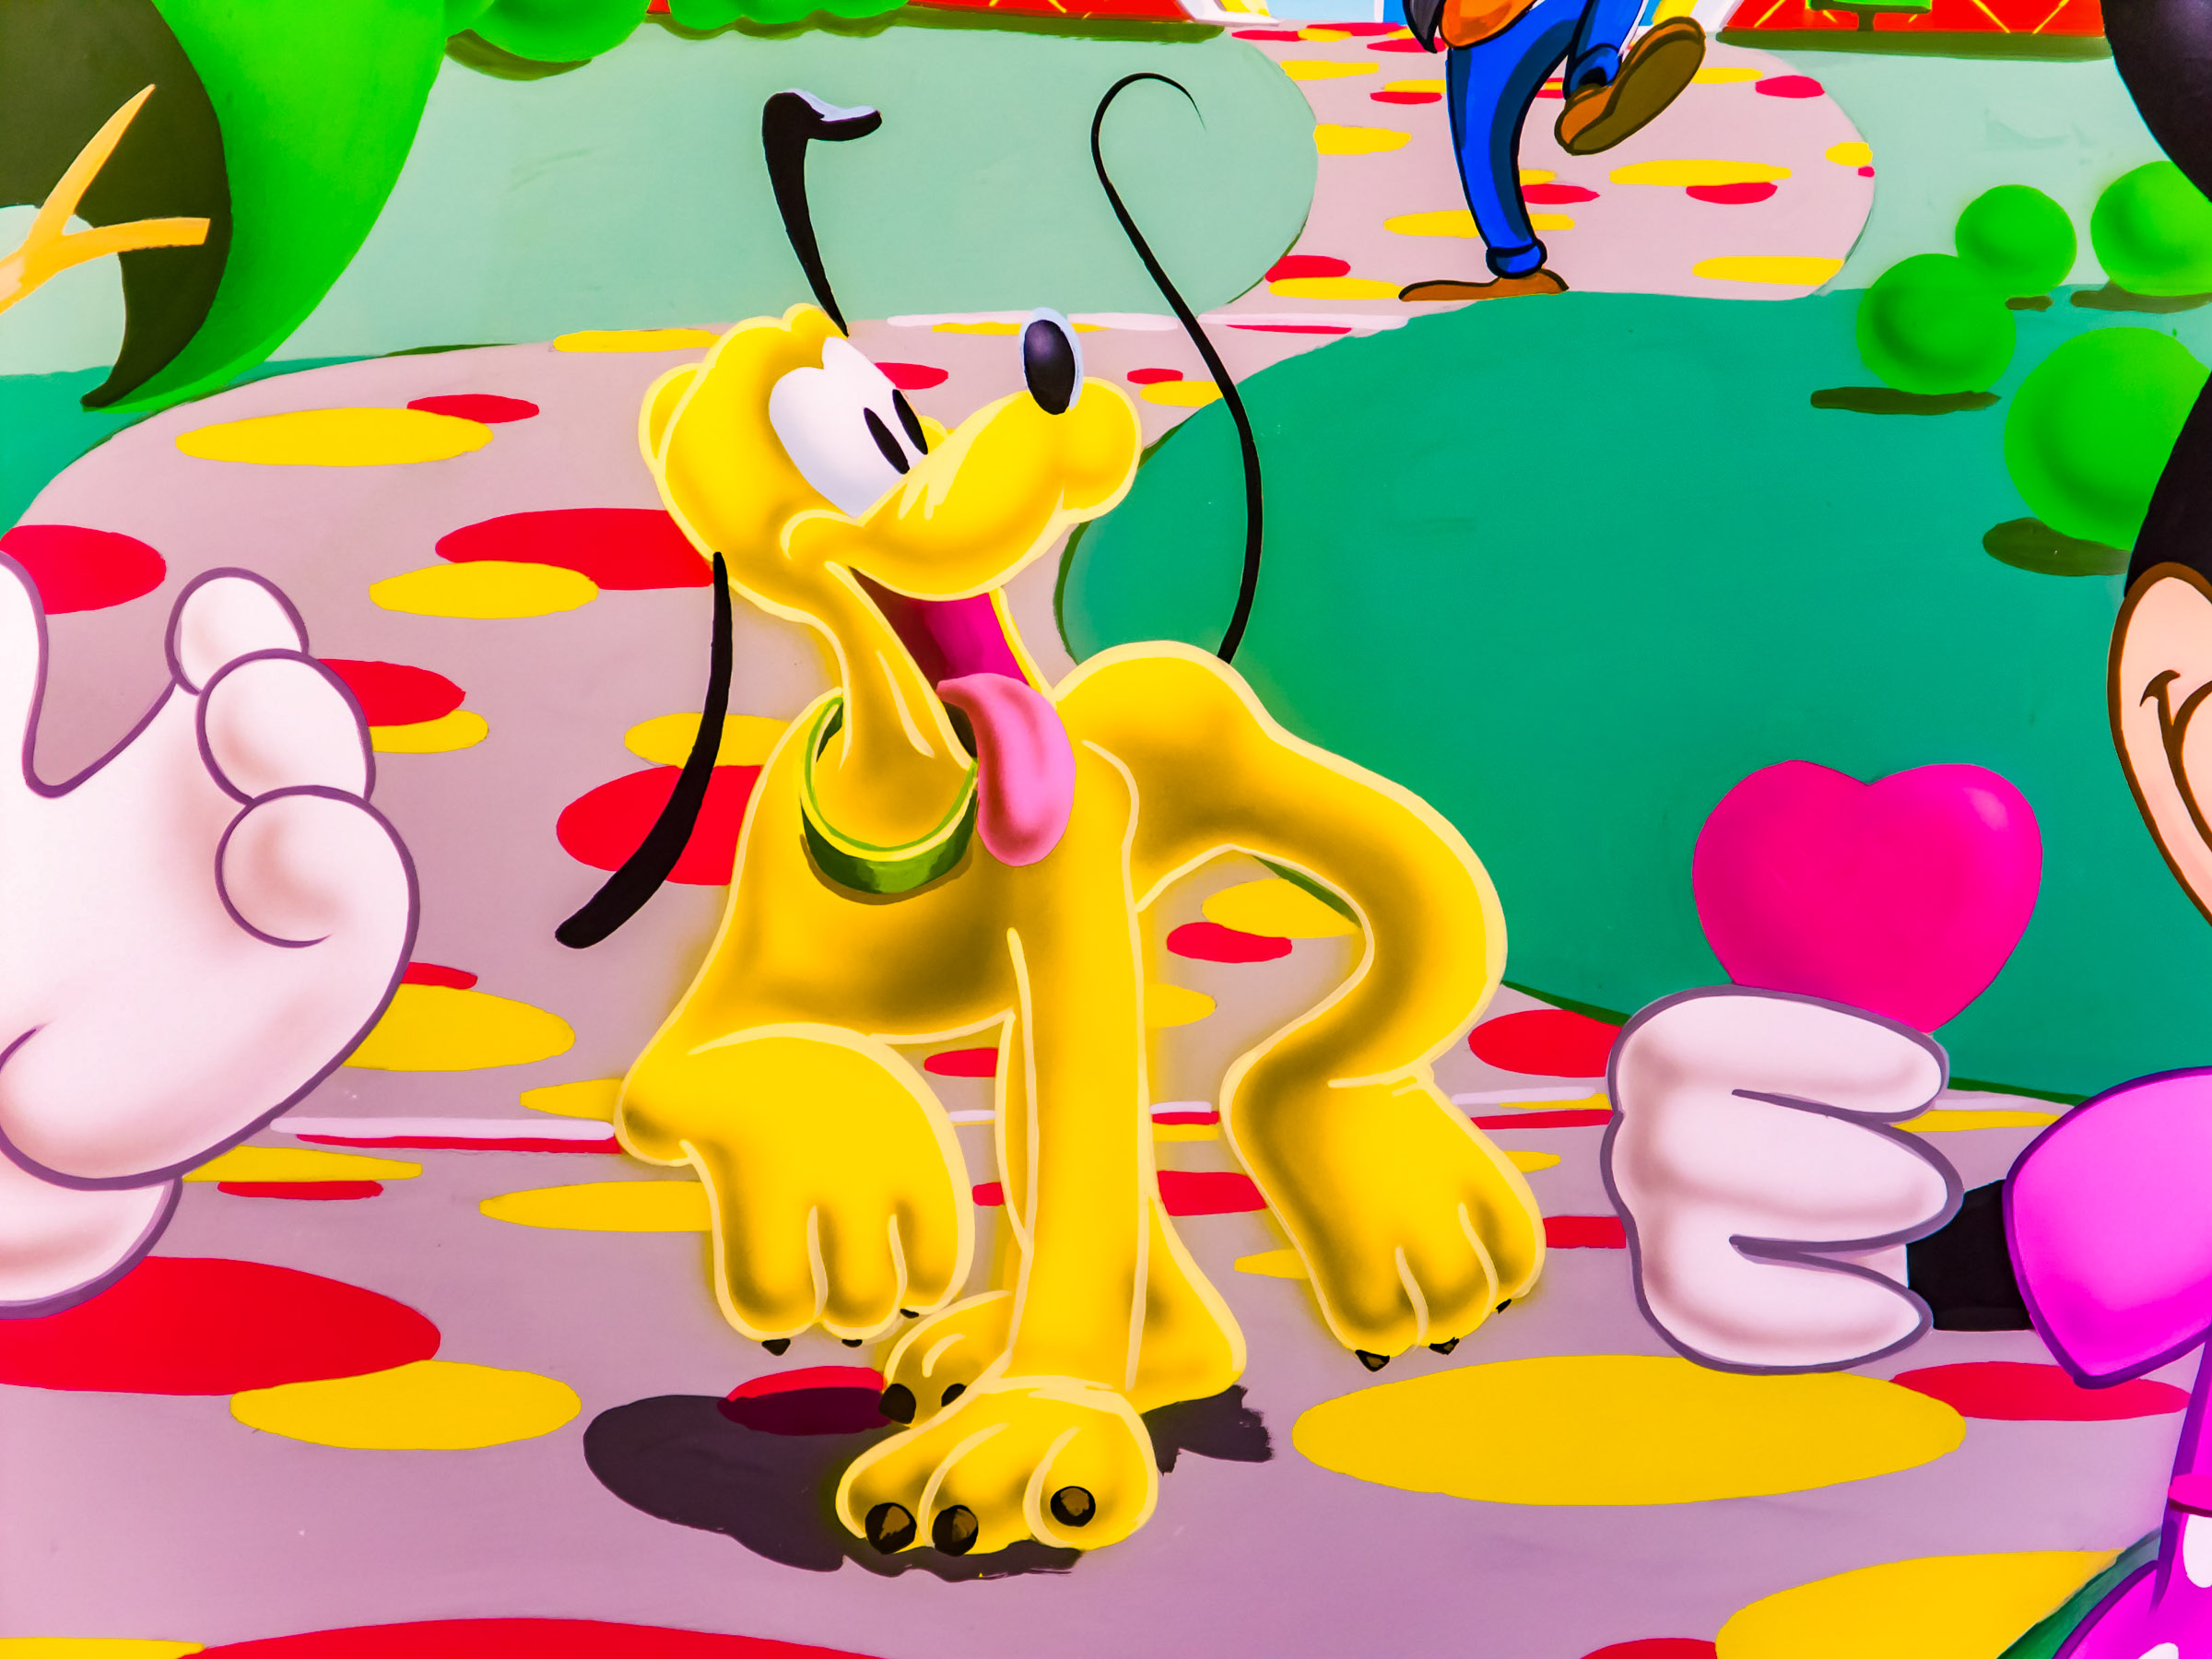 Pluto taking a stroll in this design detail.